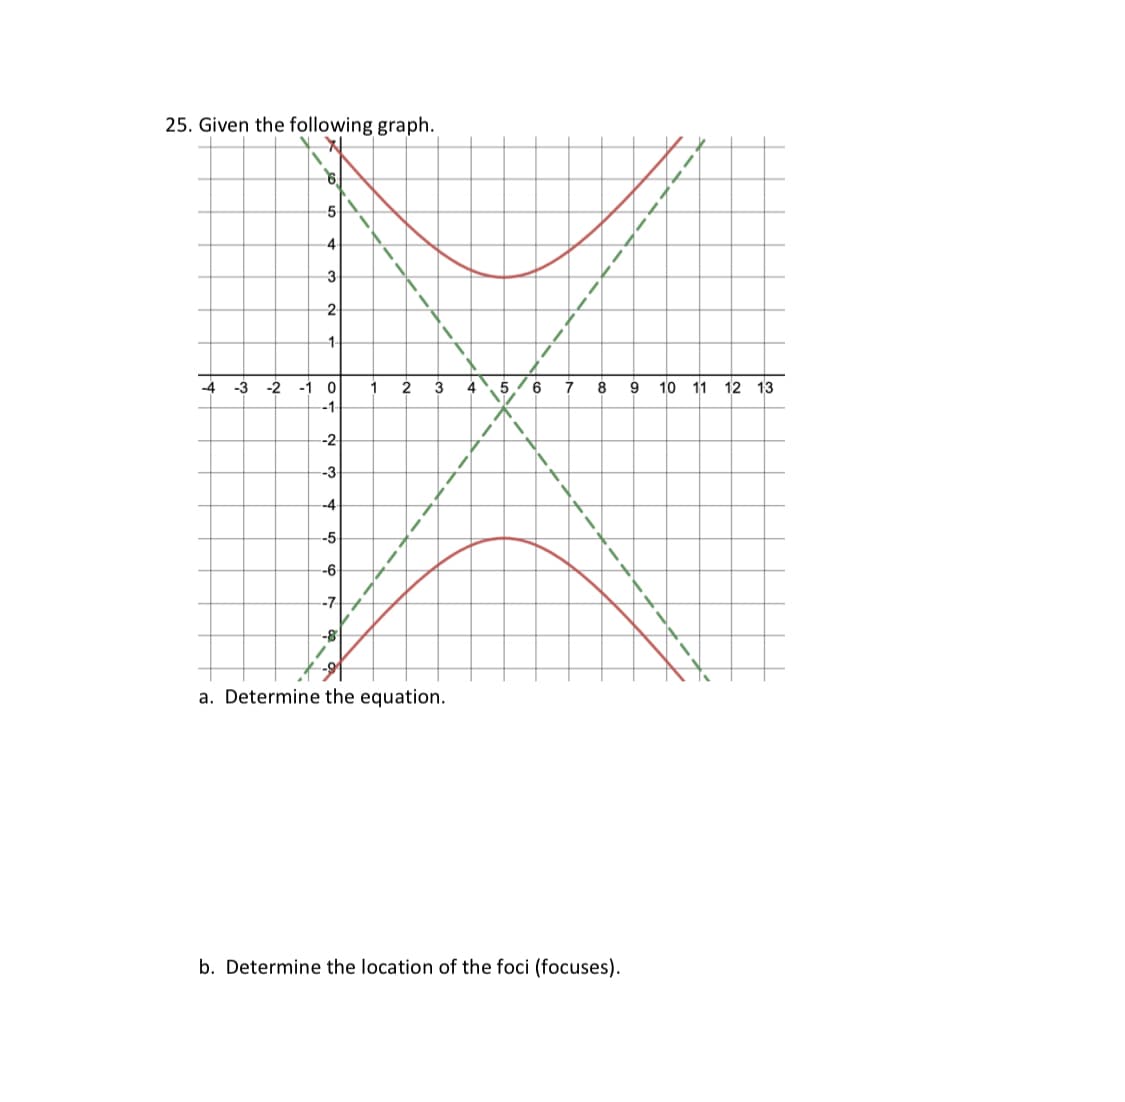 25. Given the following graph.
4
3
-1
4
-3
-2
-1 0
3
4 5
6
7
8
9
10 11 12 13
-3
-4
-5
-6
-7
-8
a. Determine the equation.
b. Determine the location of the foci (focuses).
-
